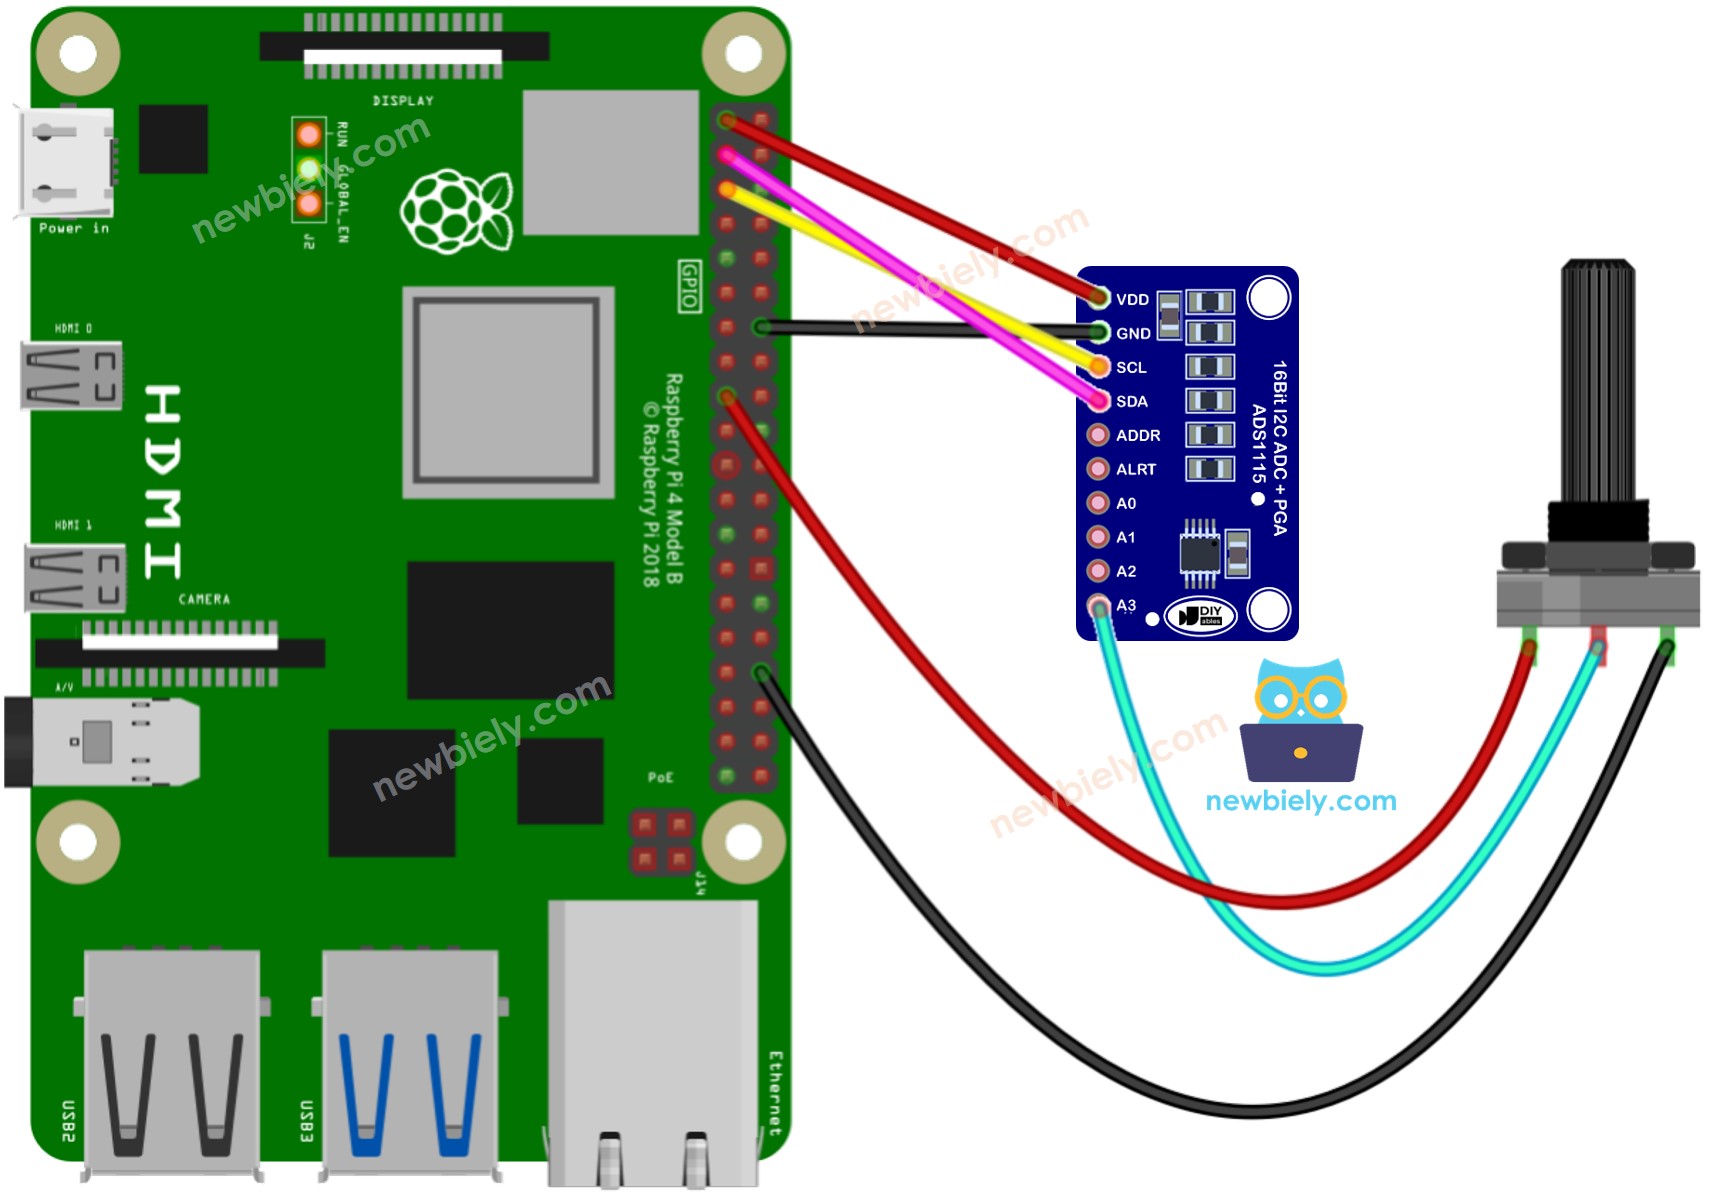 The wiring diagram between Raspberry Pi and Potentiometer